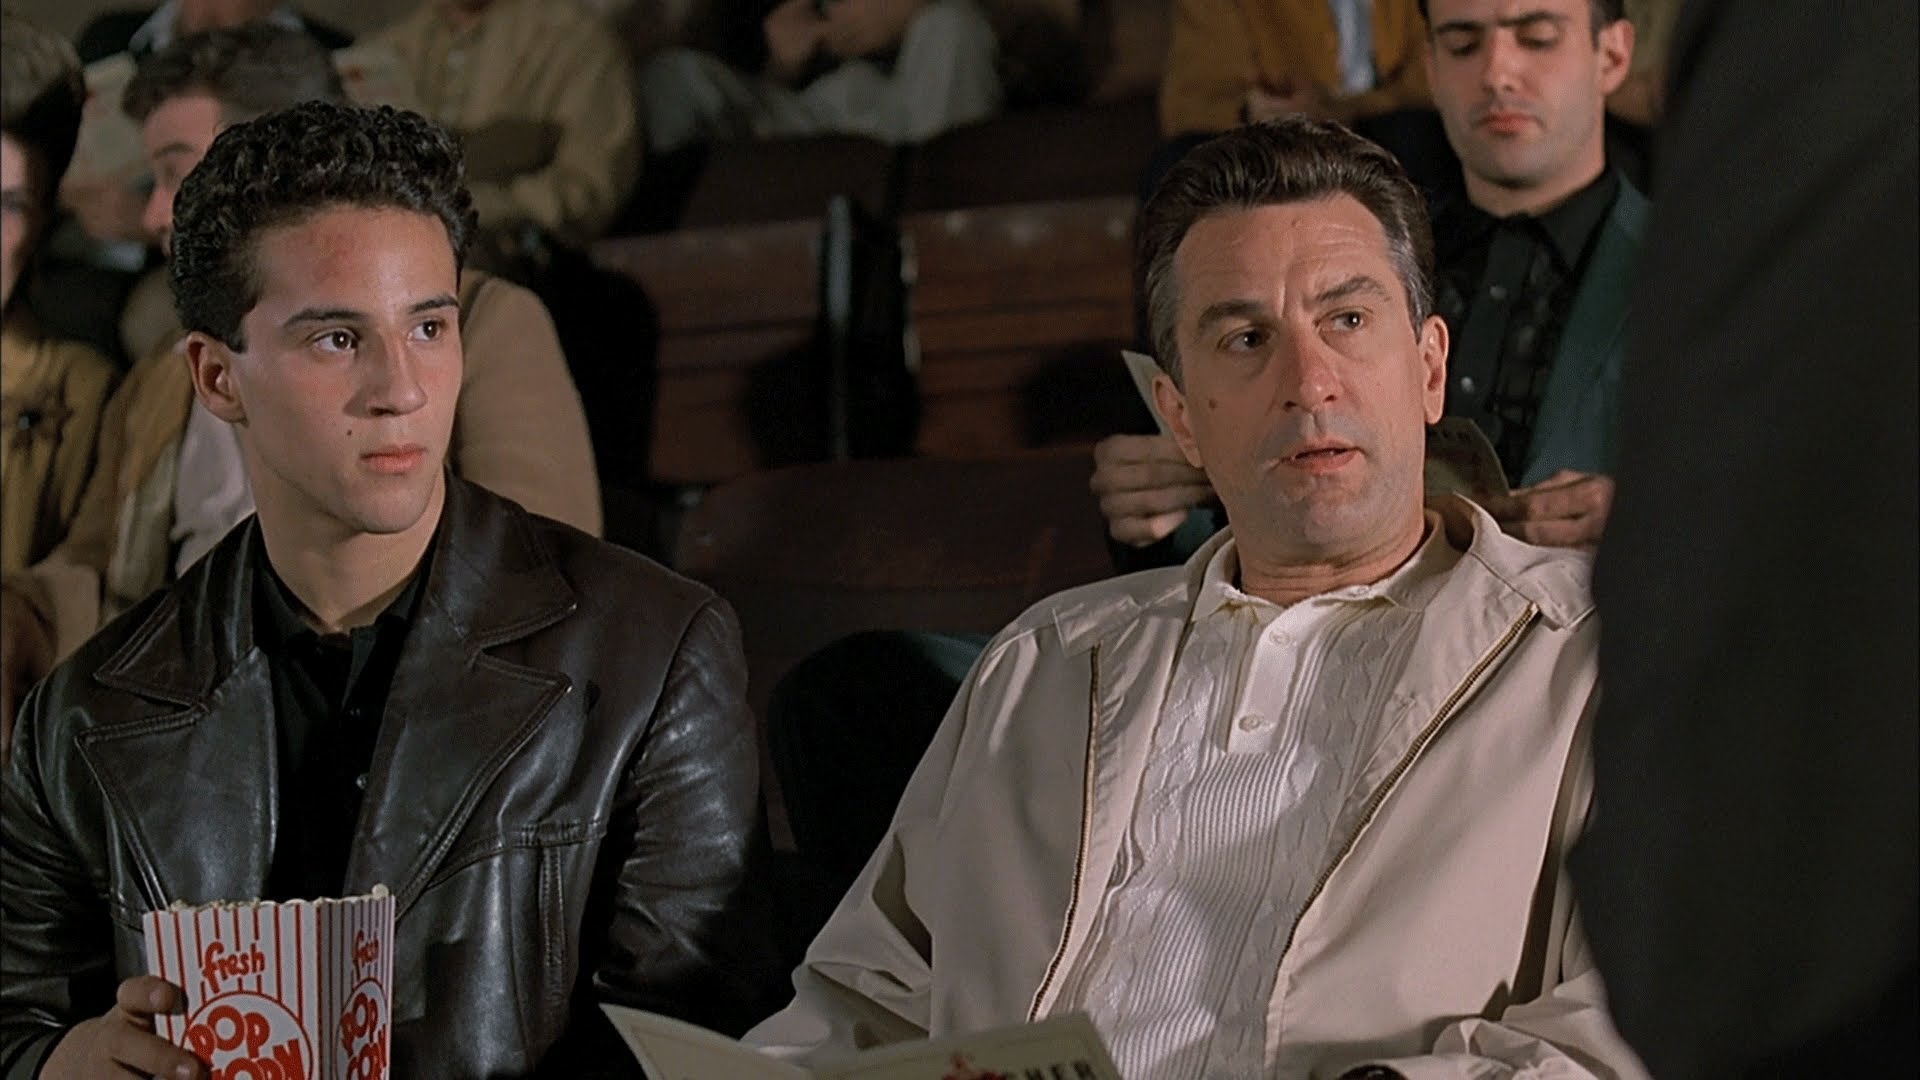 Robert De Niro Returns To His Beloved A Bronx Tale With New